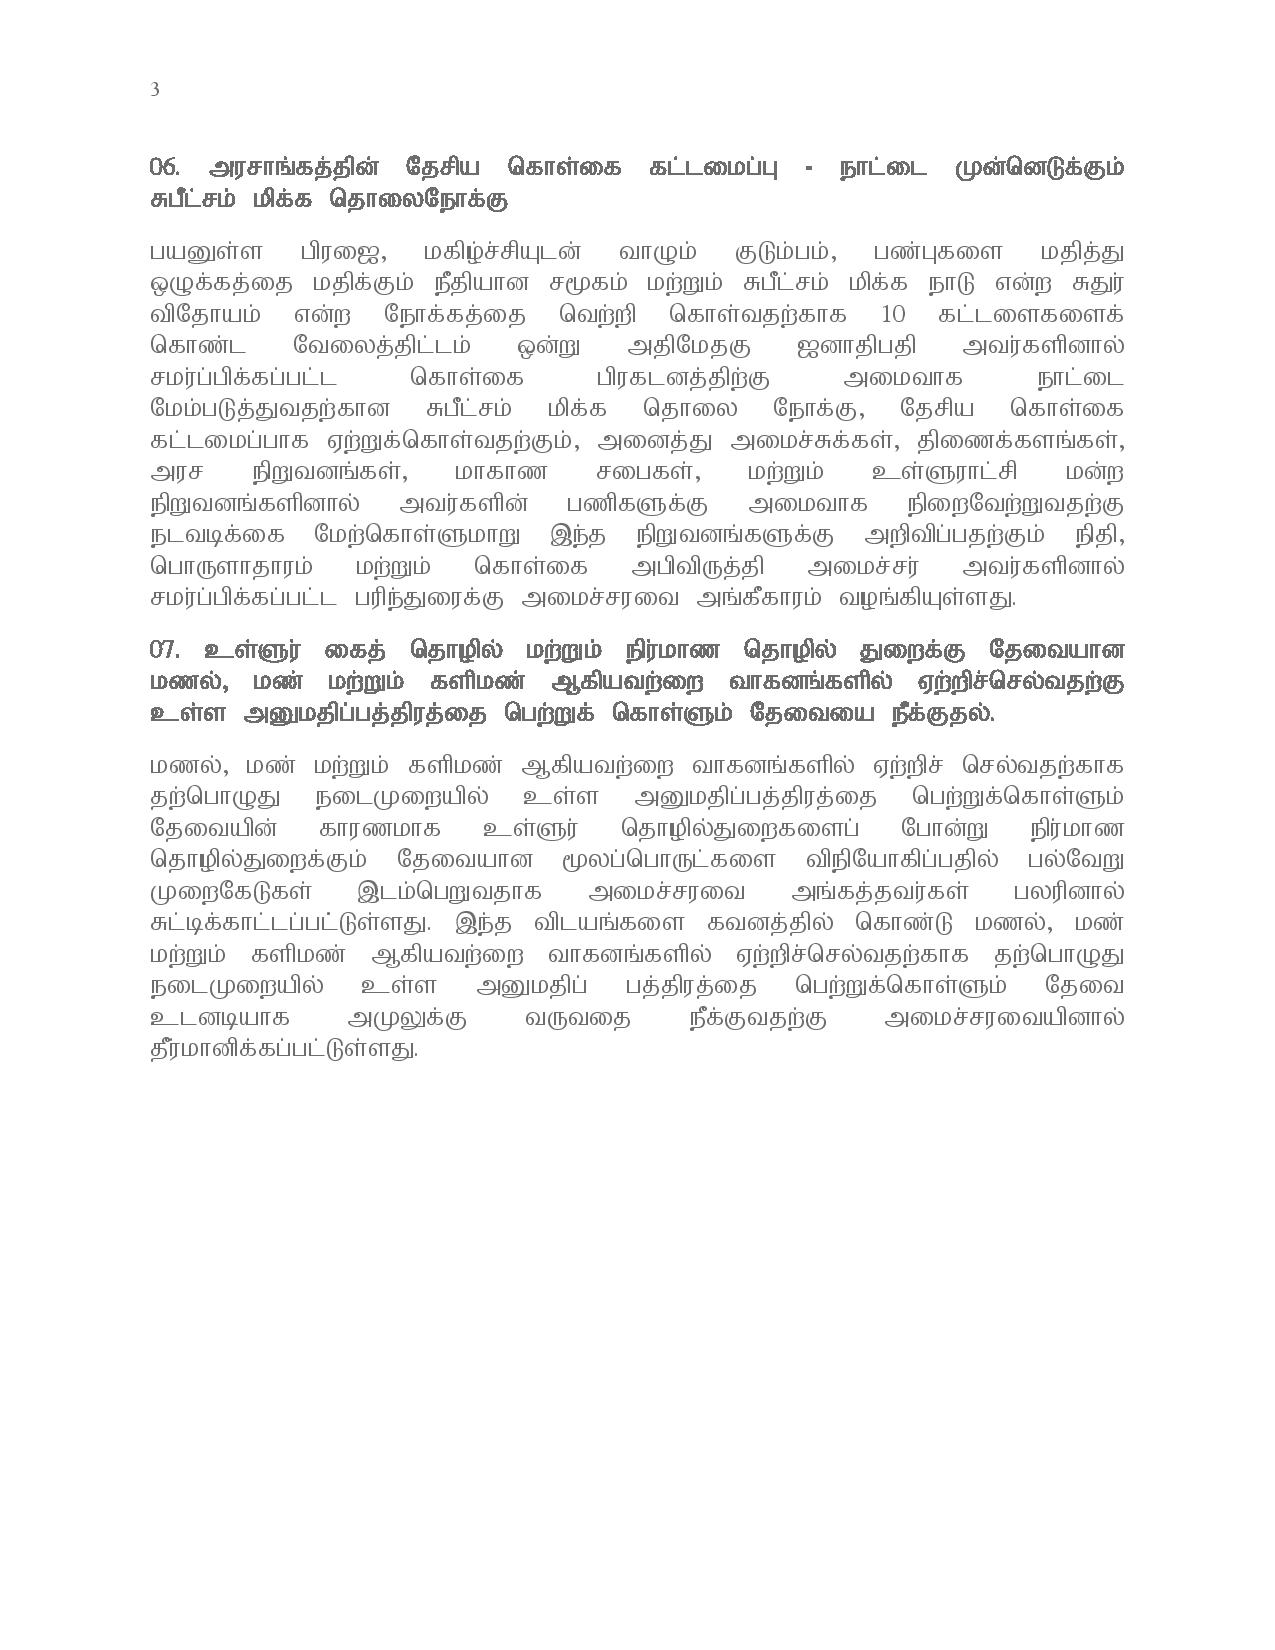 04.12.2019 cabinet. Tamil page 003